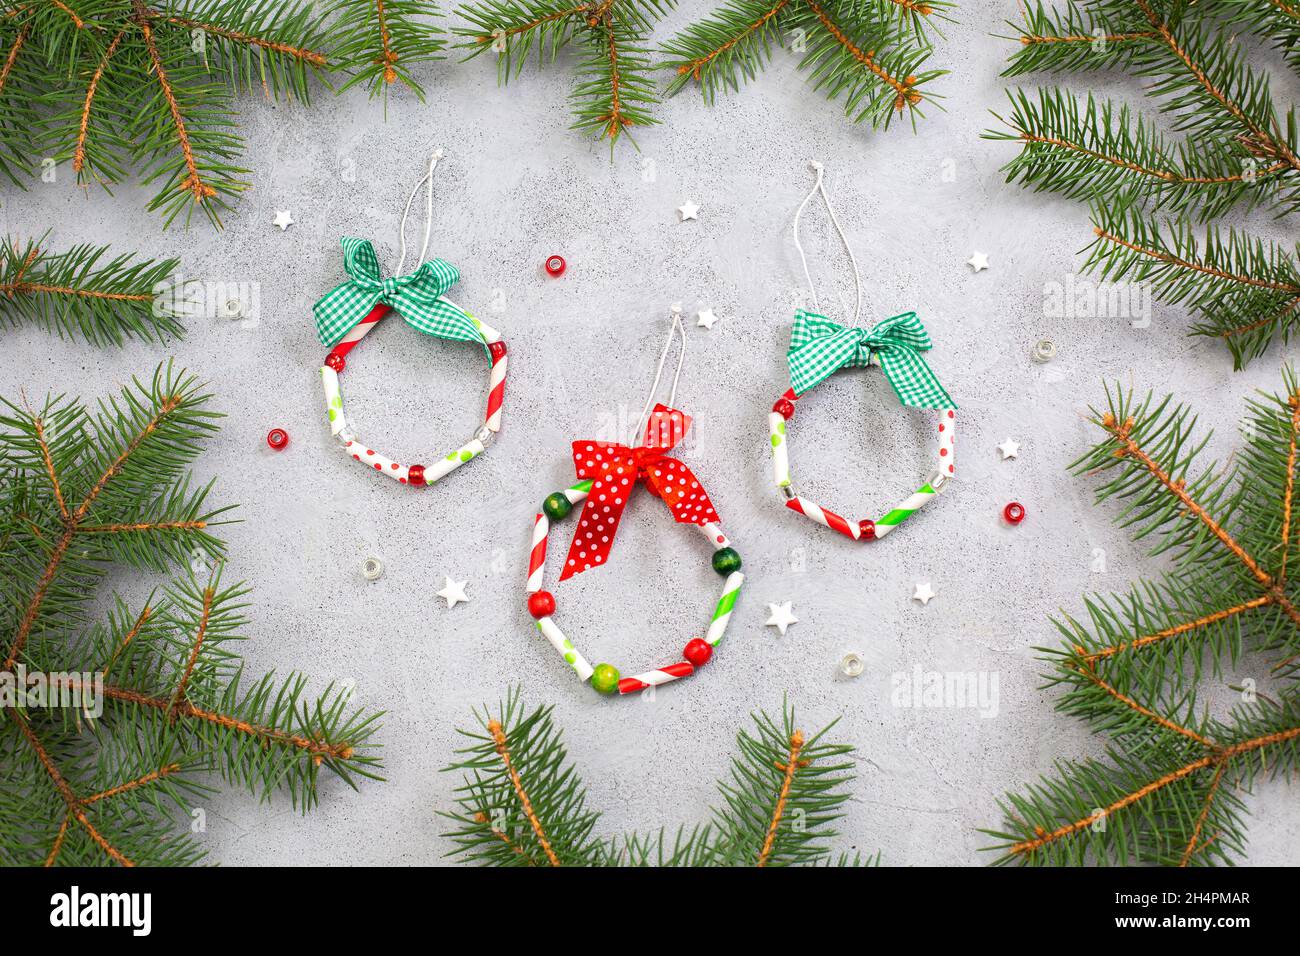 https://c8.alamy.com/comp/2H4PMAR/christmas-wreath-ormaments-from-paper-straw-step-by-step-instructions-step-10-finished-result-around-the-christmas-tree-diy-craft-for-children-hobbies-at-home-2H4PMAR.jpg